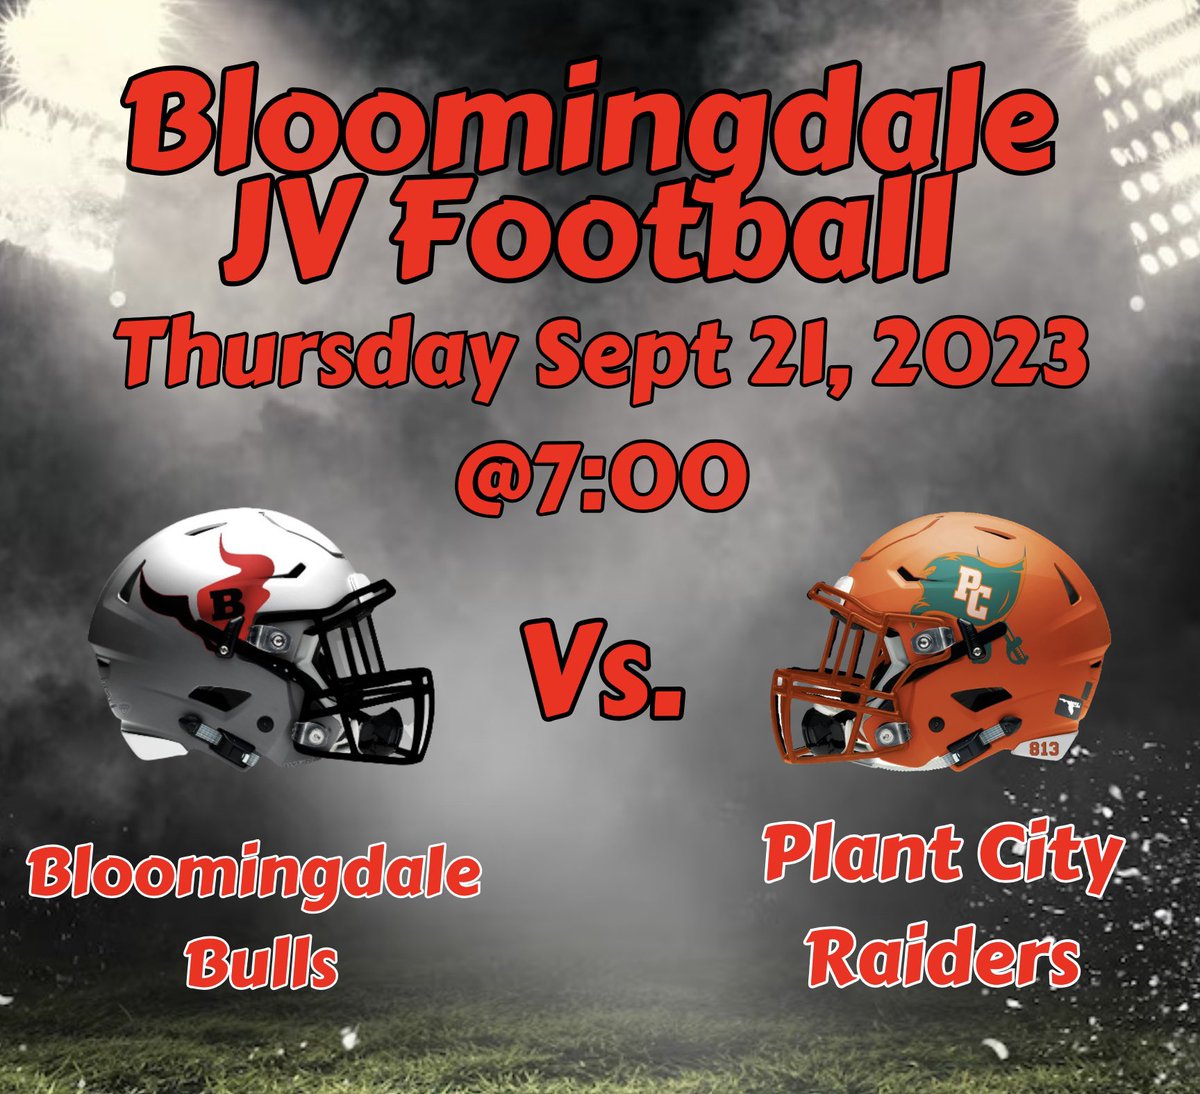 Schedule Update! JV football will play at home vs Plant City on 9/21 @BloomingdaleSHS